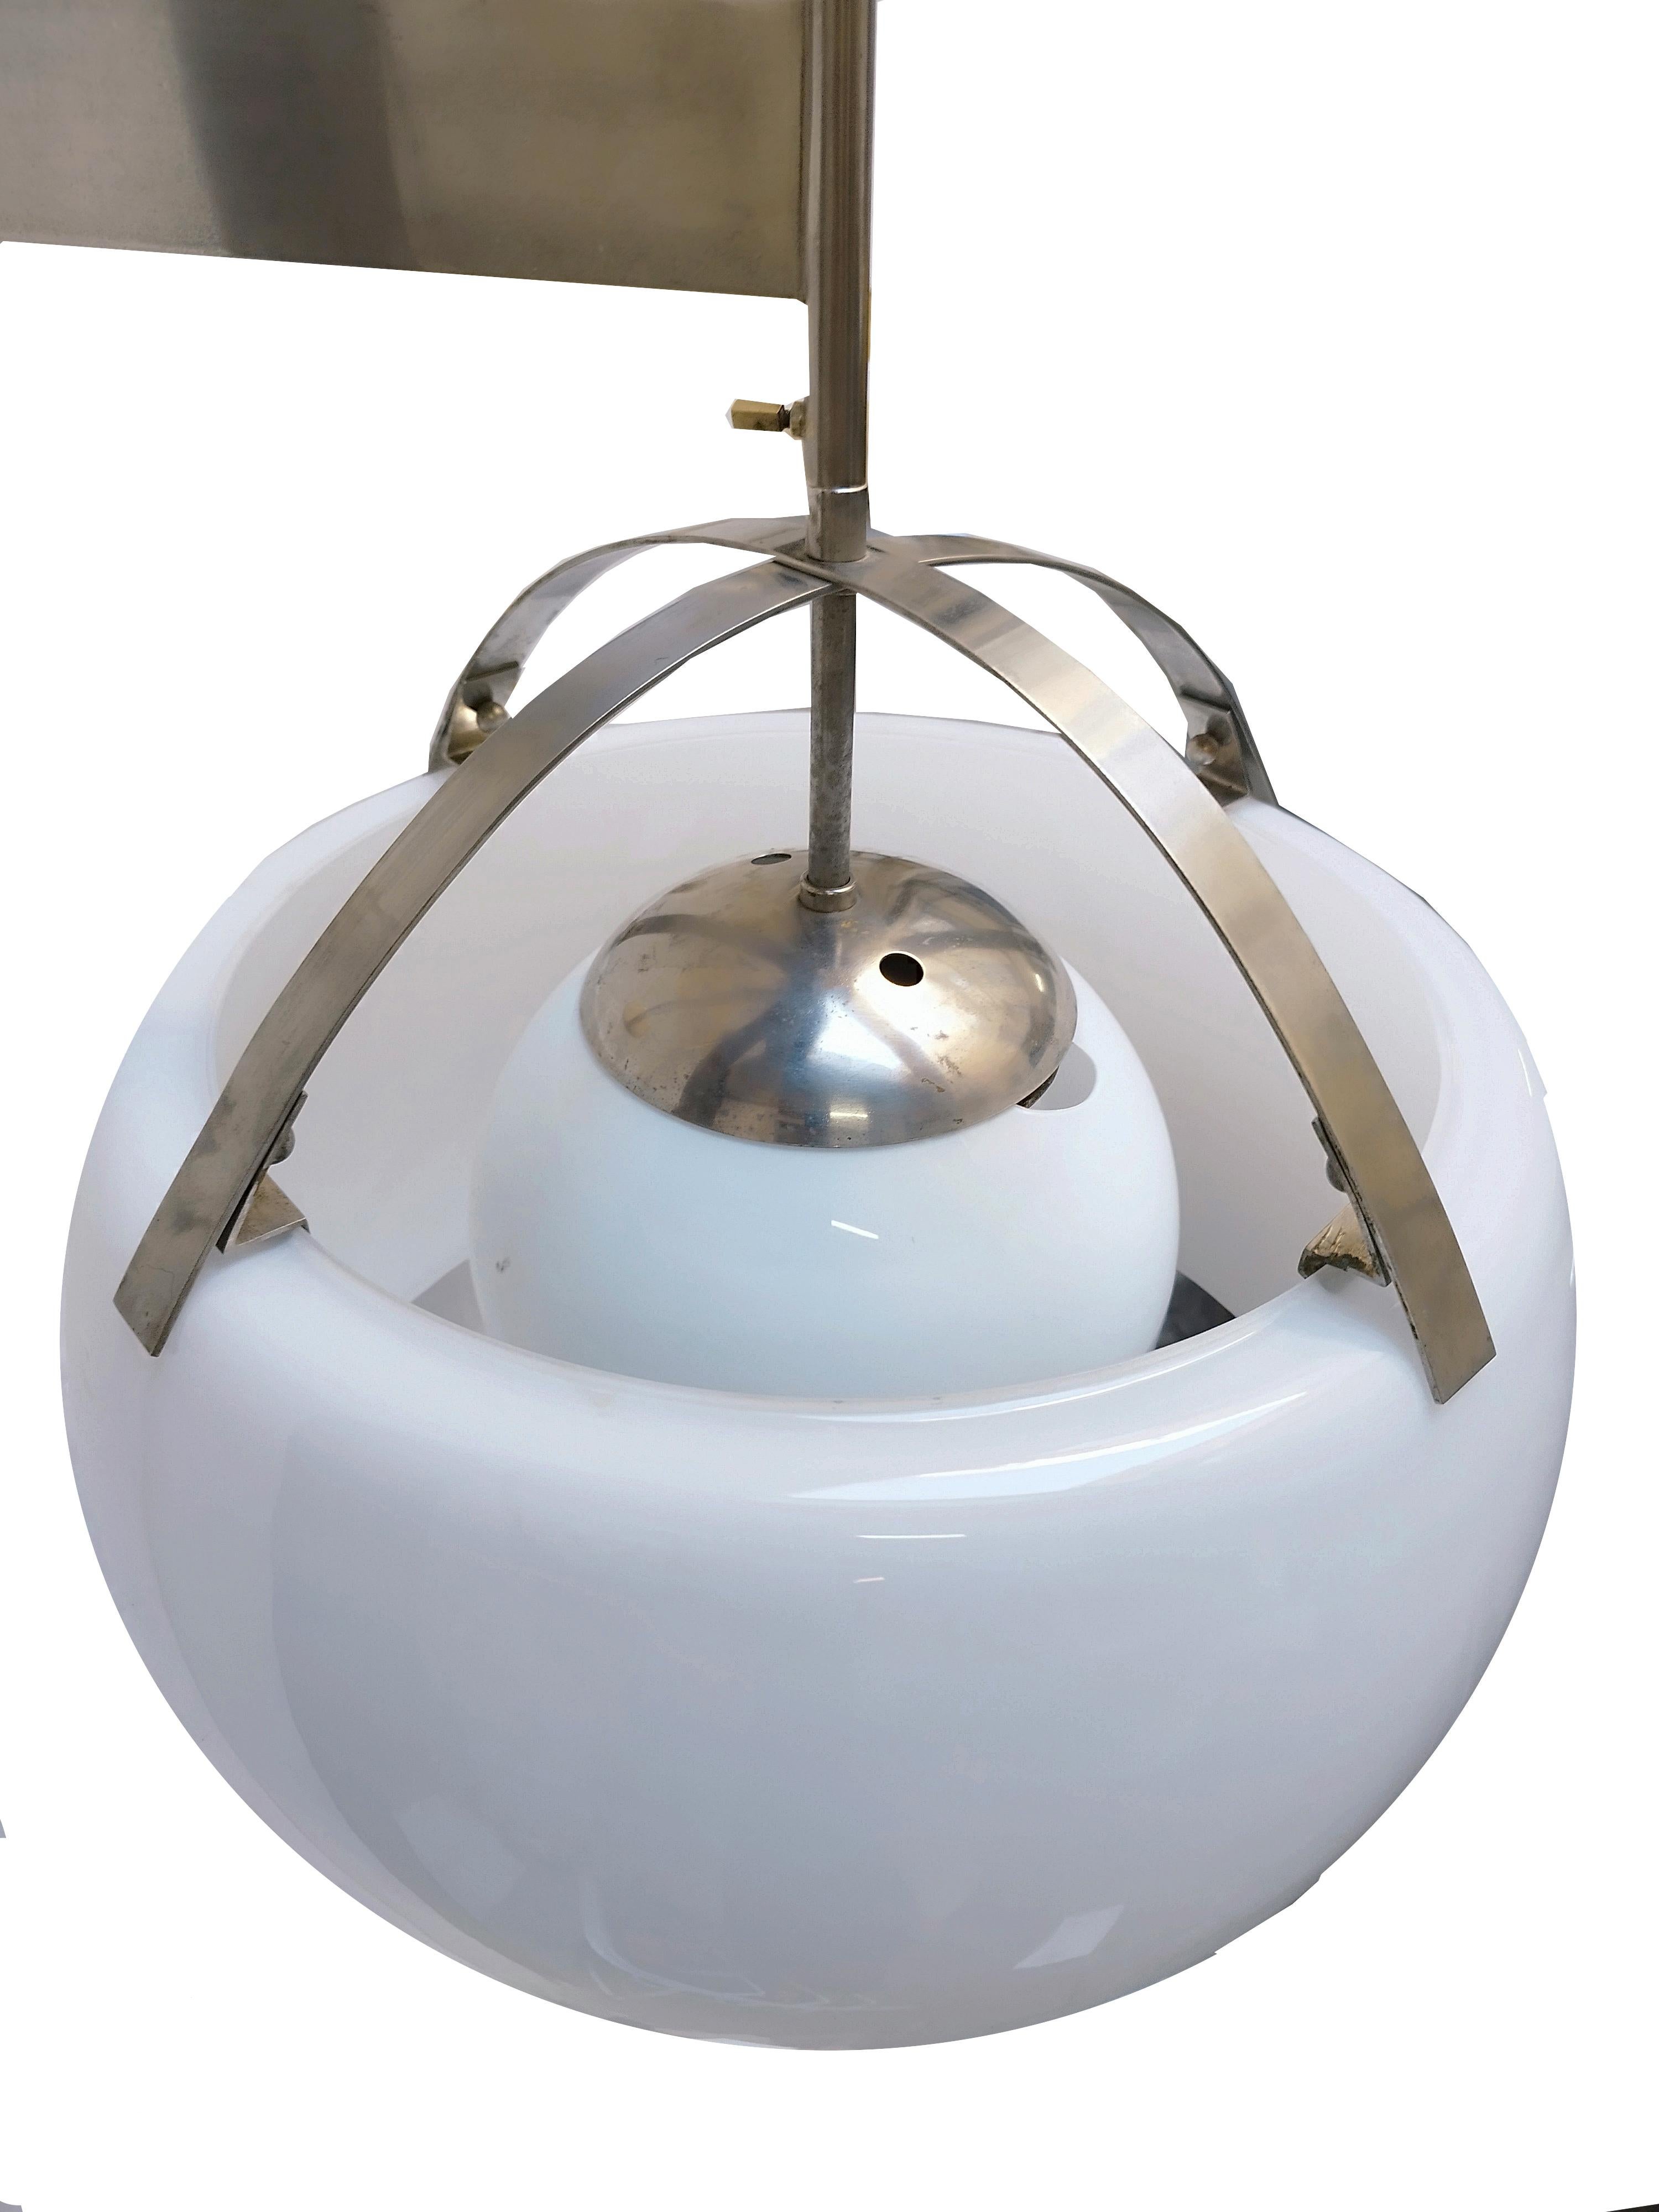 Omega wall lamp by Vico Magistretti for Artemide
Matt nickel-plated brass structure with height-adjustable stem.
Globe and diffuser in opaline glass.
Structure in good condition, signs of oxidation on the frame.